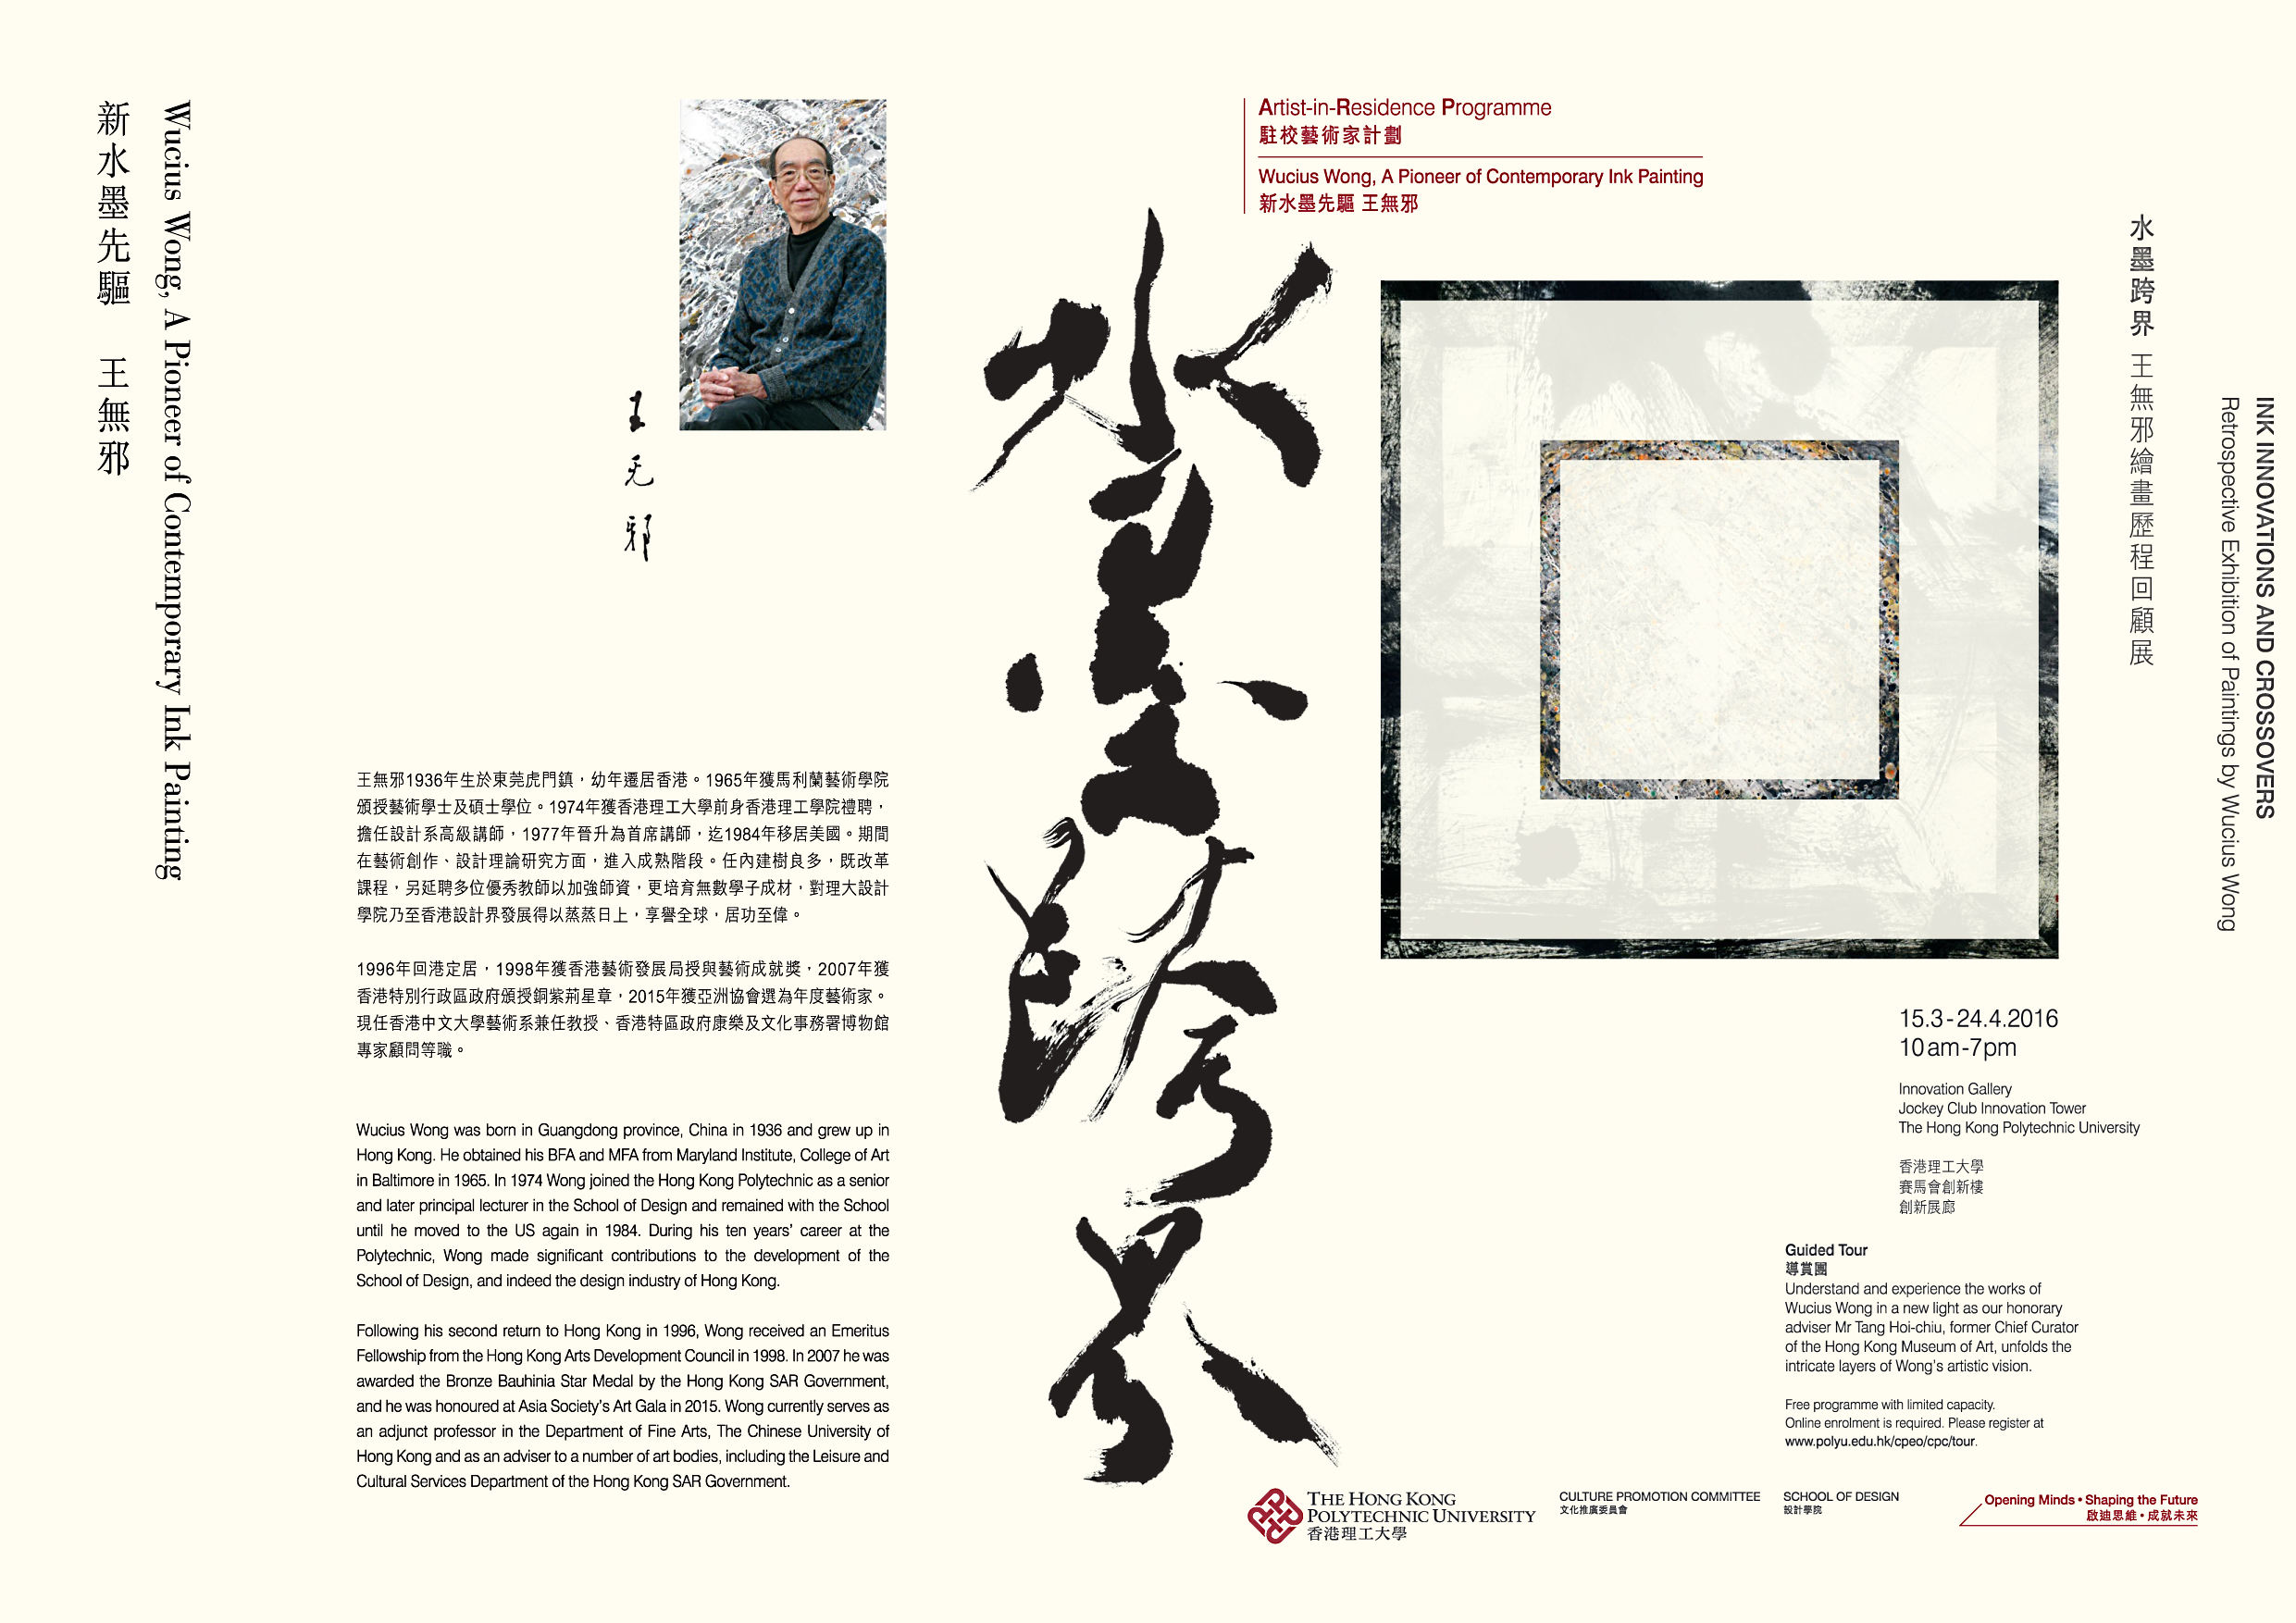 INK INNOVATIONS AND CROSSOVERS: Retrospective Exhibition of Paintings by Wucius Wong